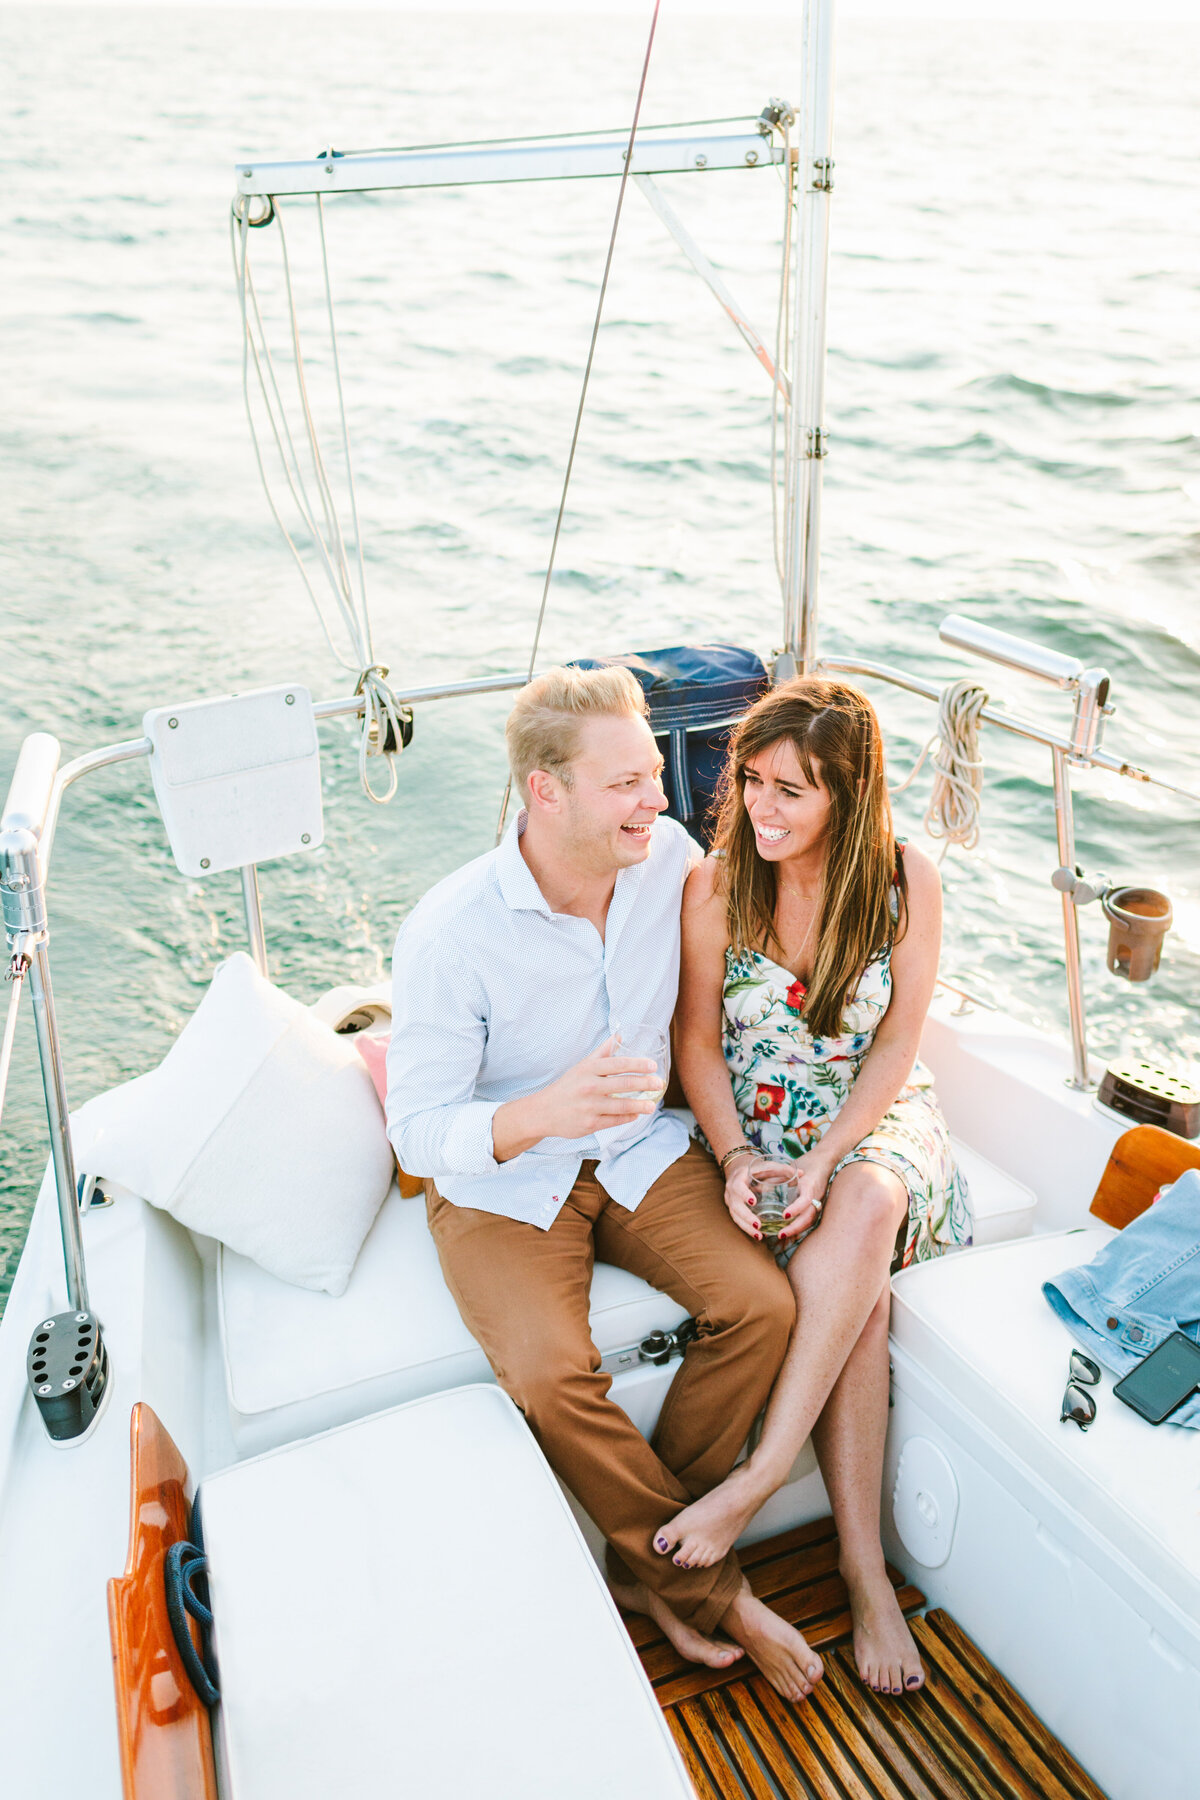 Best California and Texas Engagement Photographer-Jodee Debes Photography-56